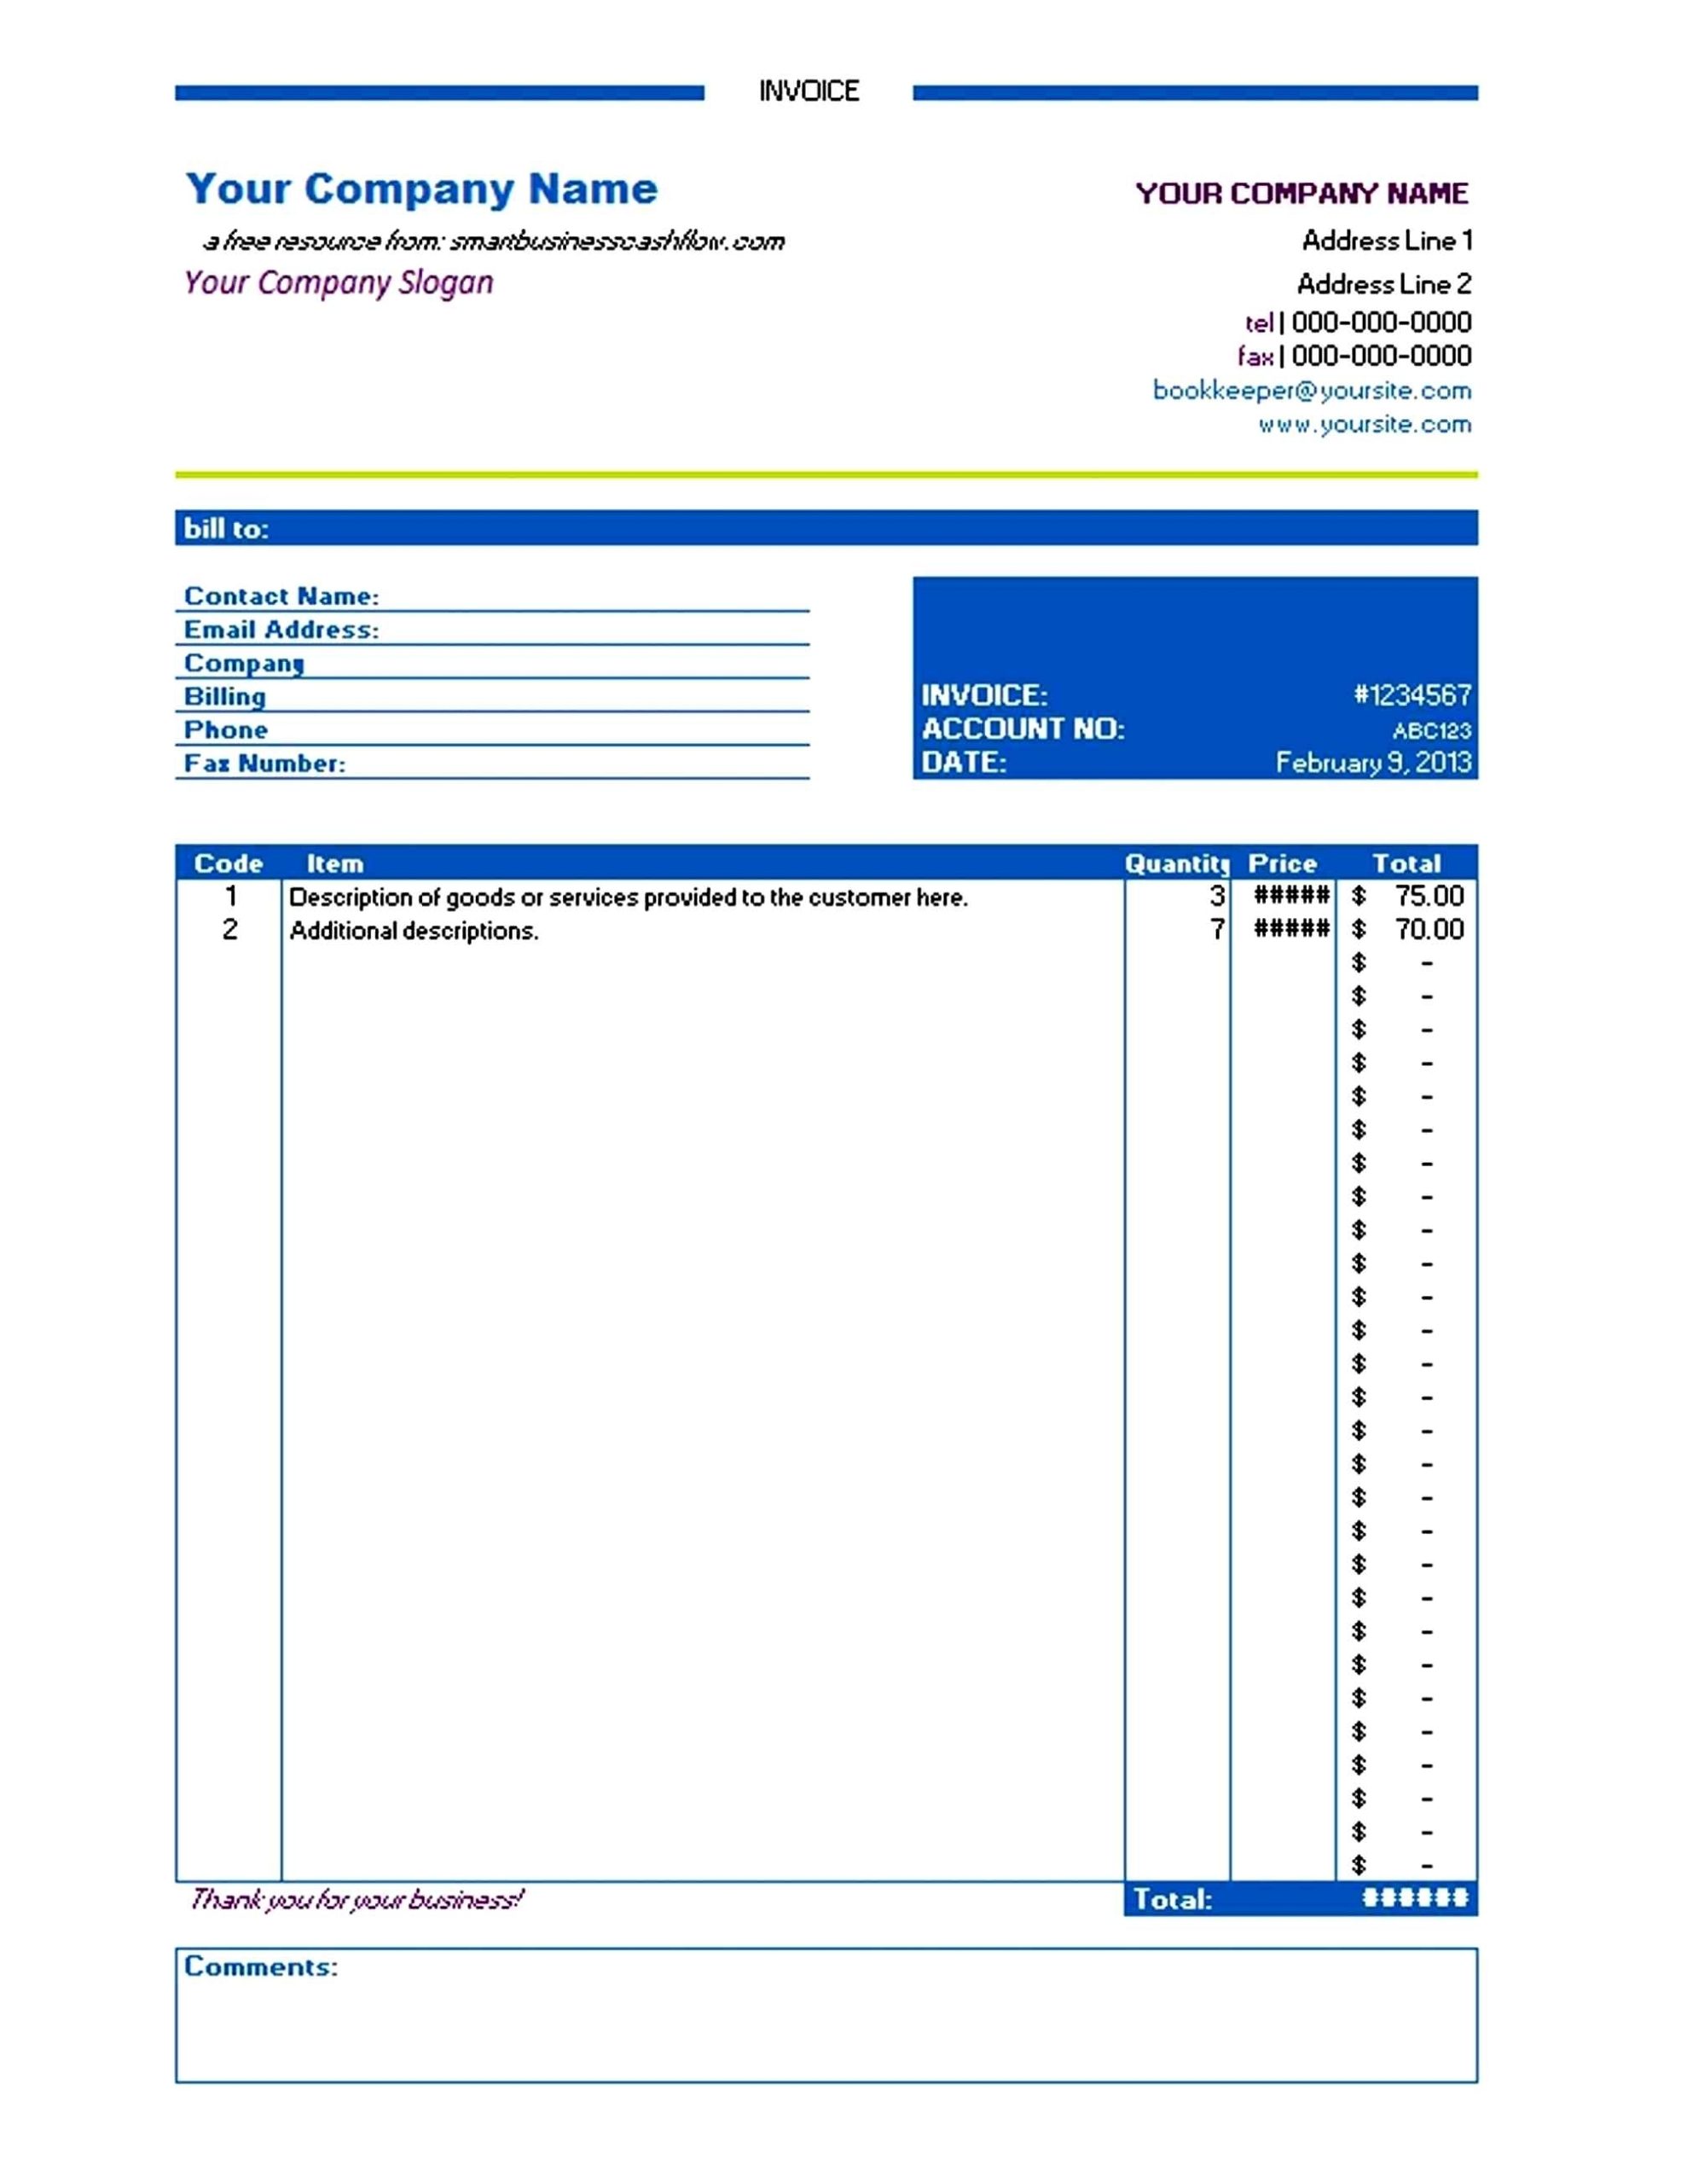 Best Invoice Template * Invoice Template Ideas Intended For Free Downloadable Invoice Template For Word